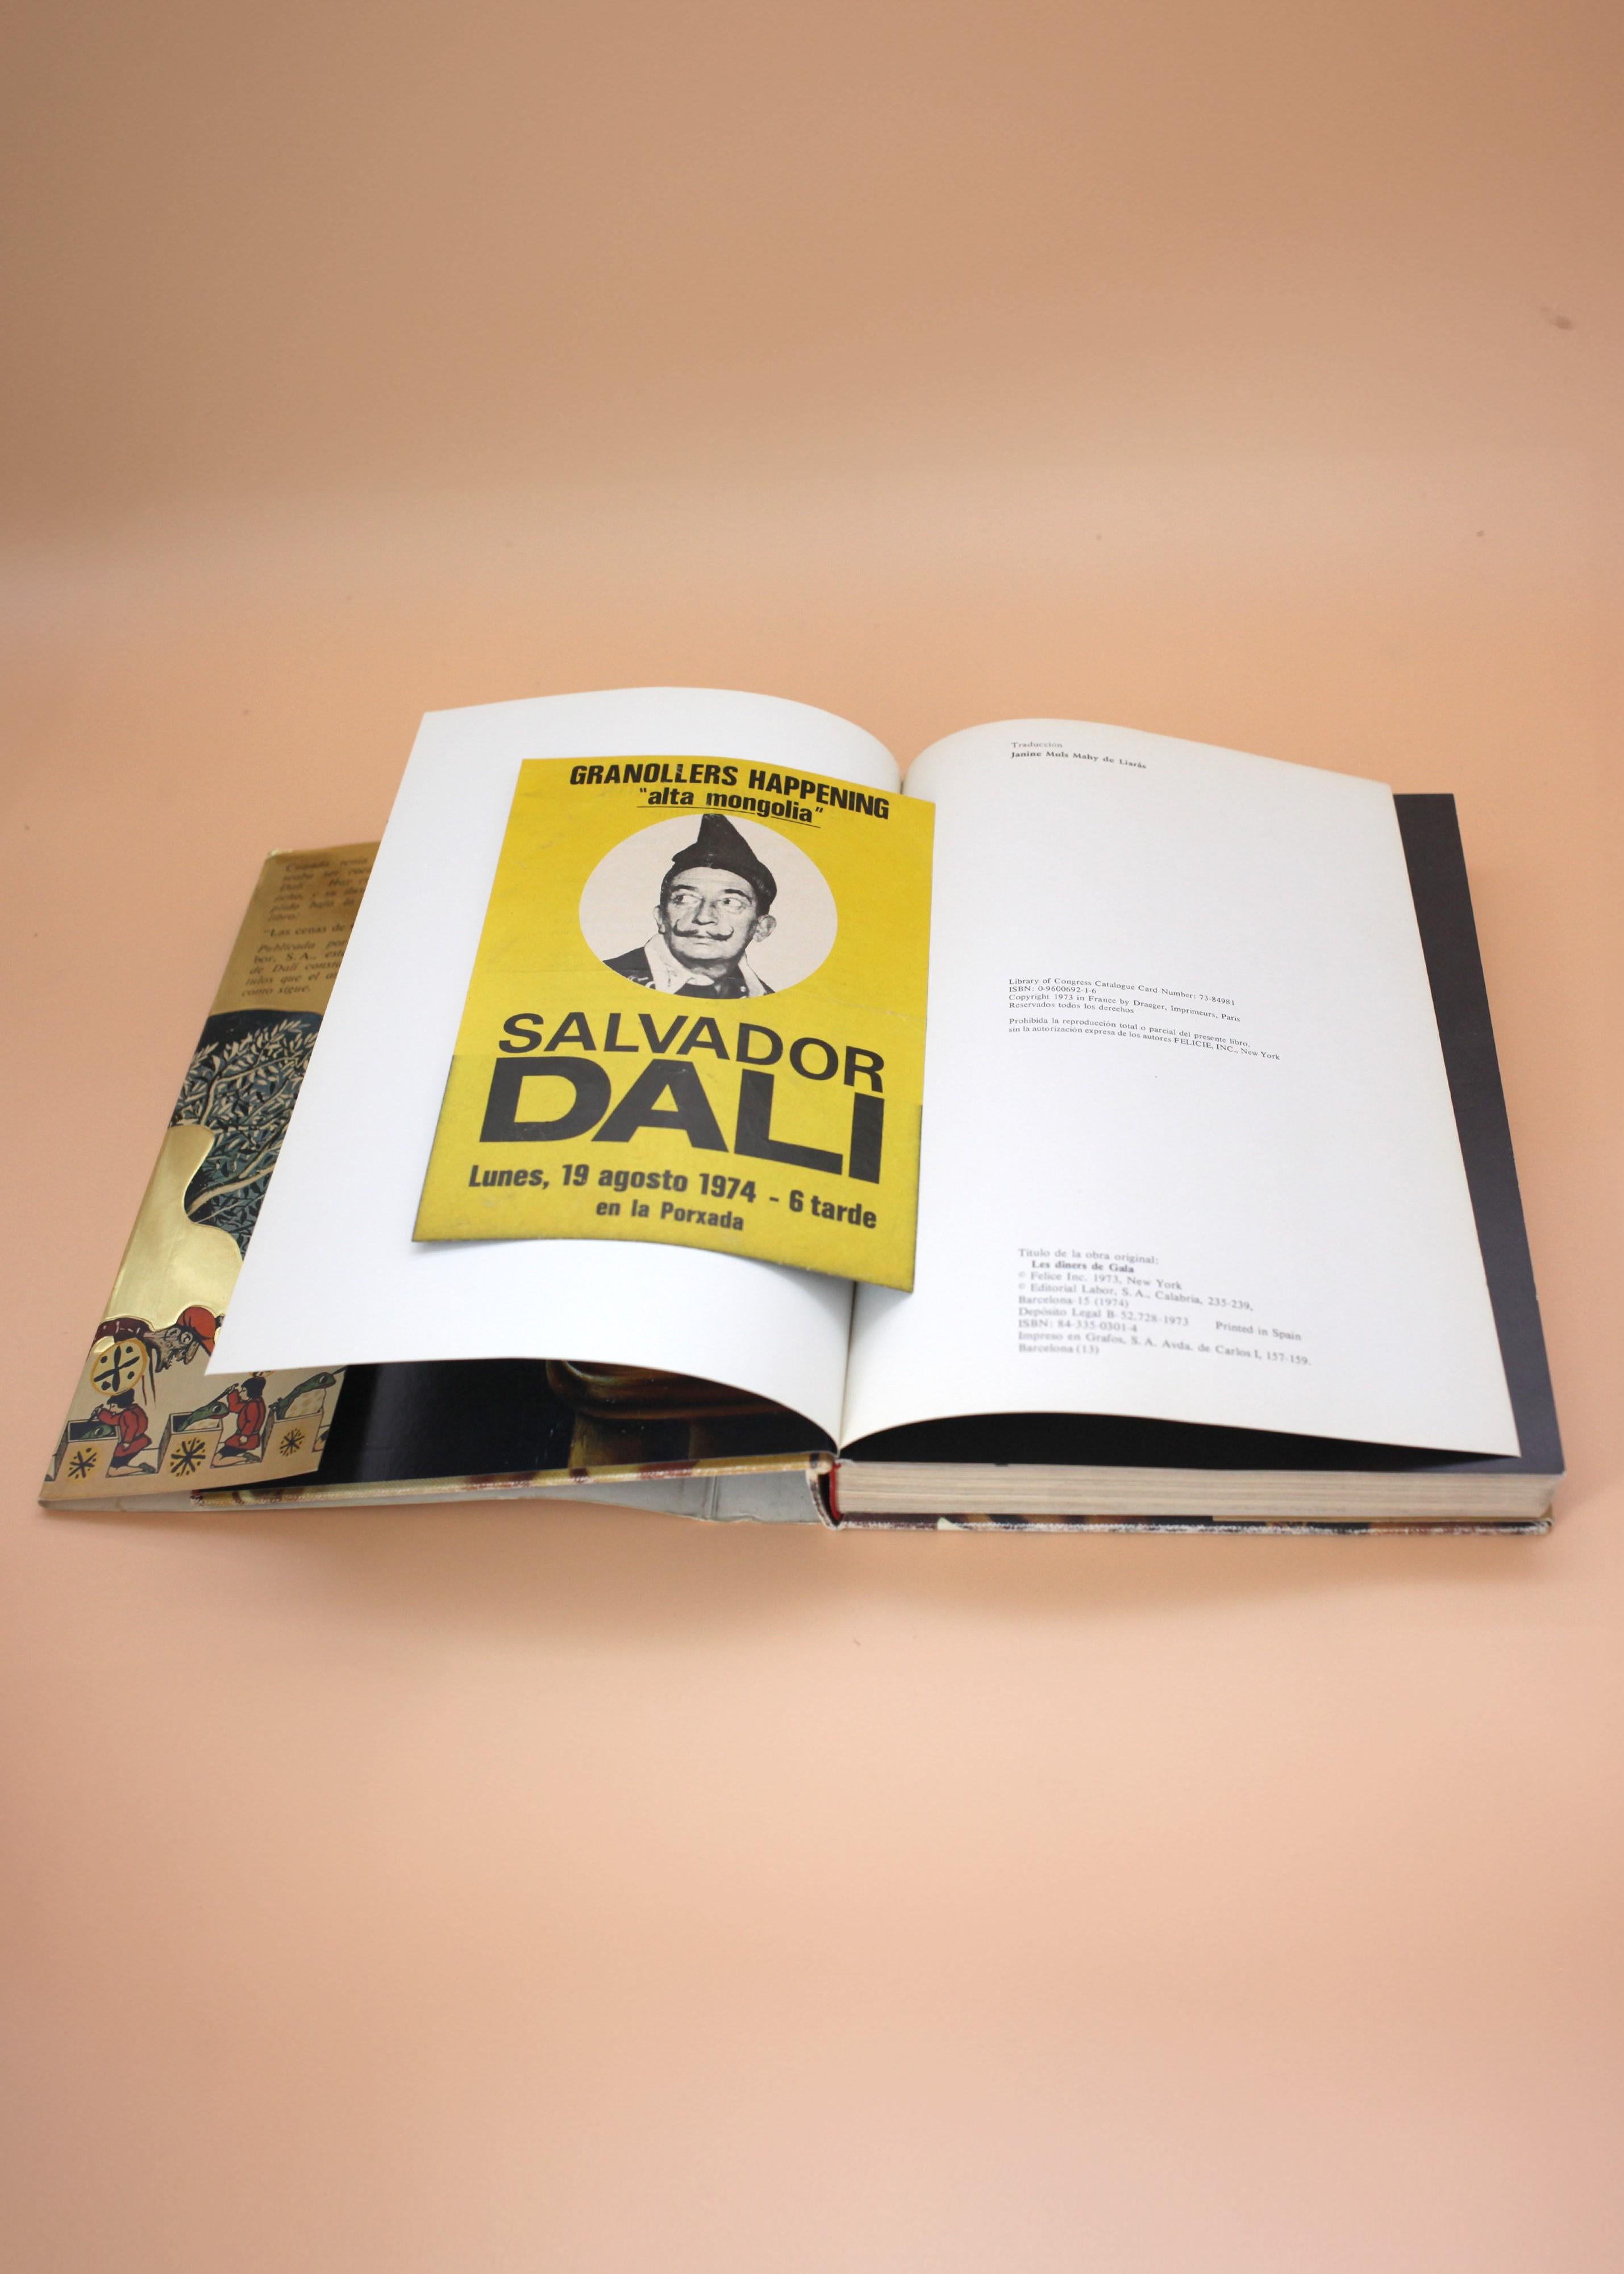 Revel in the eccentricities of Salvador Dalí with this first Spanish edition of 